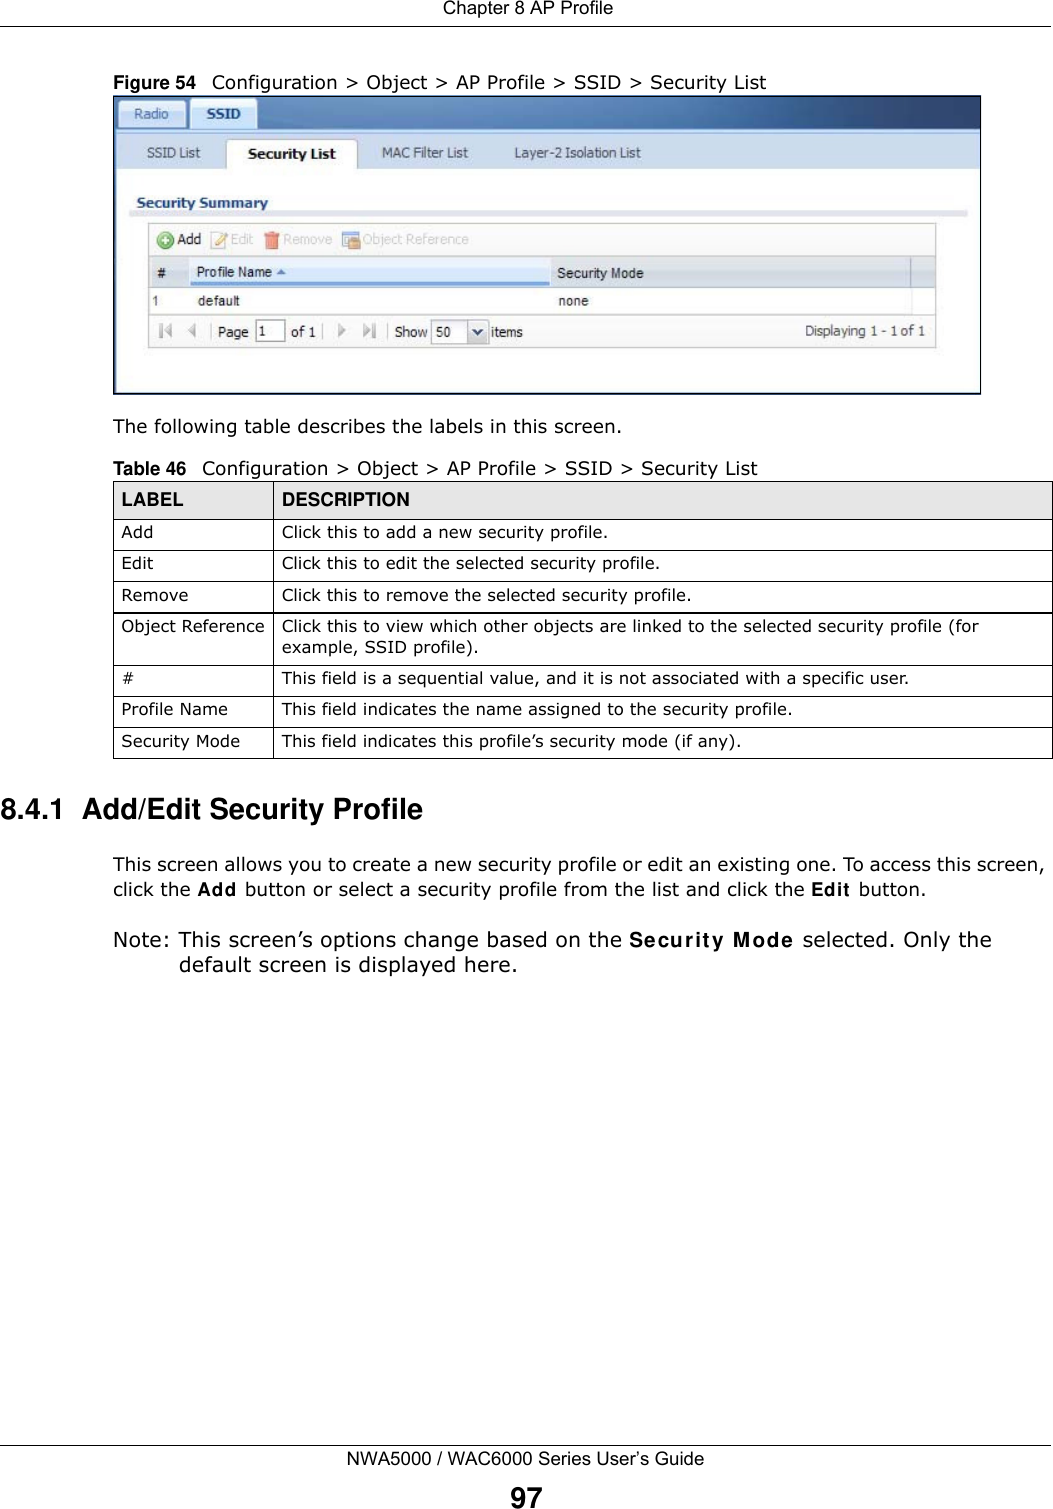  Chapter 8 AP ProfileNWA5000 / WAC6000 Series User’s Guide97Figure 54   Configuration &gt; Object &gt; AP Profile &gt; SSID &gt; Security ListThe following table describes the labels in this screen.  8.4.1  Add/Edit Security ProfileThis screen allows you to create a new security profile or edit an existing one. To access this screen, click the Add button or select a security profile from the list and click the Edit  button.Note: This screen’s options change based on the Secu rit y Mode selected. Only the default screen is displayed here.Table 46   Configuration &gt; Object &gt; AP Profile &gt; SSID &gt; Security ListLABEL DESCRIPTIONAdd Click this to add a new security profile.Edit Click this to edit the selected security profile.Remove Click this to remove the selected security profile.Object Reference Click this to view which other objects are linked to the selected security profile (for example, SSID profile).# This field is a sequential value, and it is not associated with a specific user.Profile Name This field indicates the name assigned to the security profile.Security Mode This field indicates this profile’s security mode (if any).